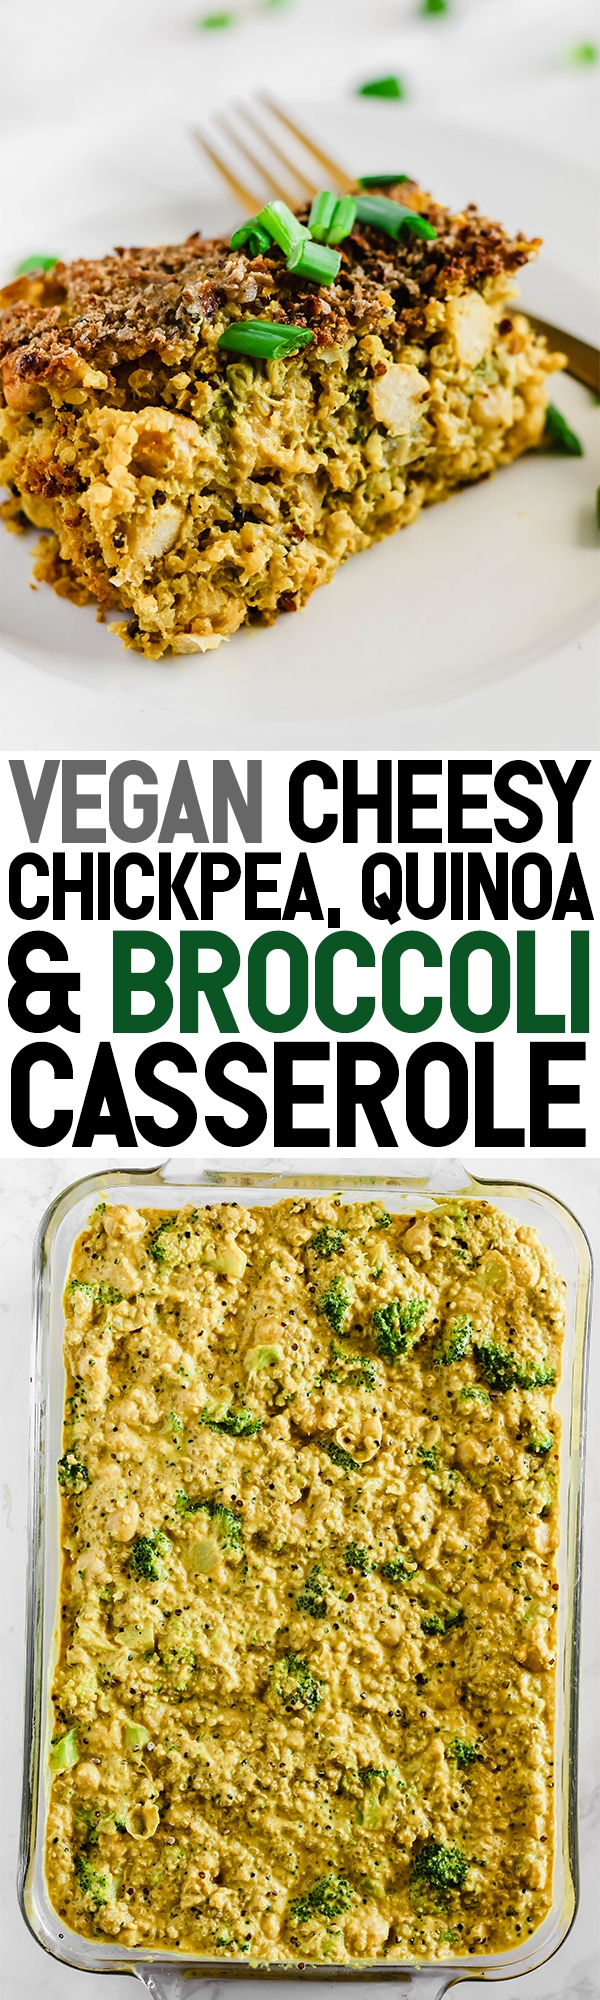 Make this wholesome Cheesy Chickpea, Quinoa & Broccoli Casserole and enjoy leftovers for days! Each serving is full of plant protein, whole grains & vegetables. Vegan & gluten-free!